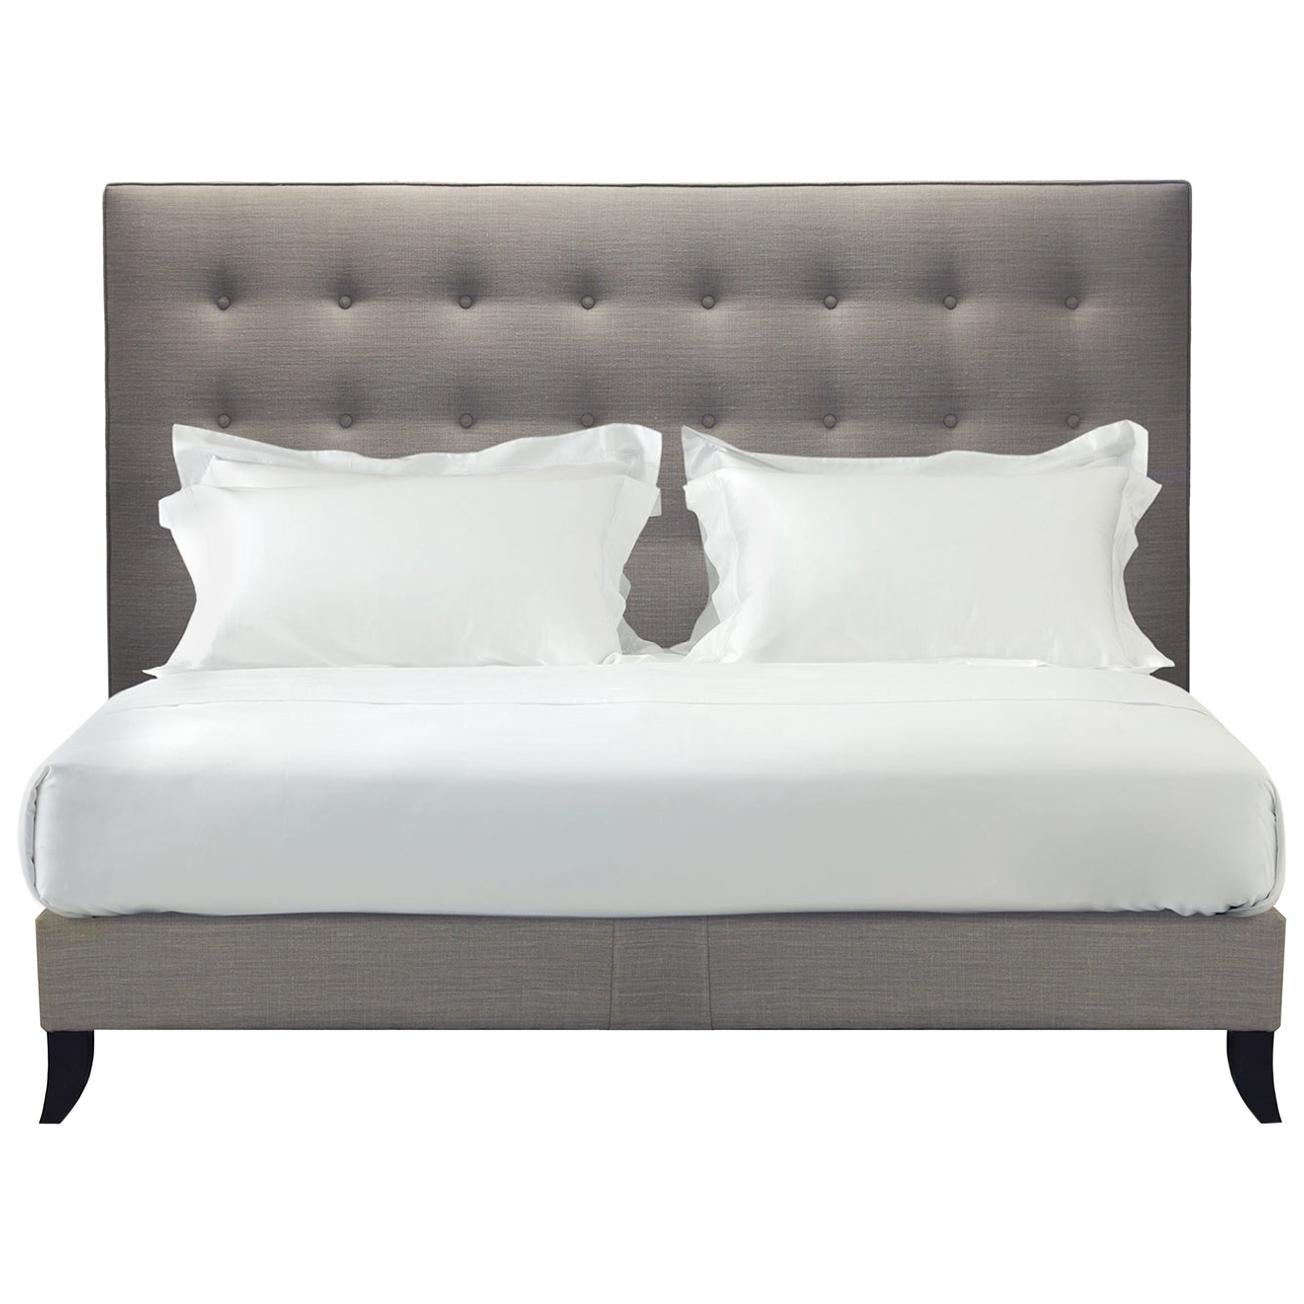 Savoir Holly Bed in Linen with Undulated Buttoning, Made to Order, US King Size